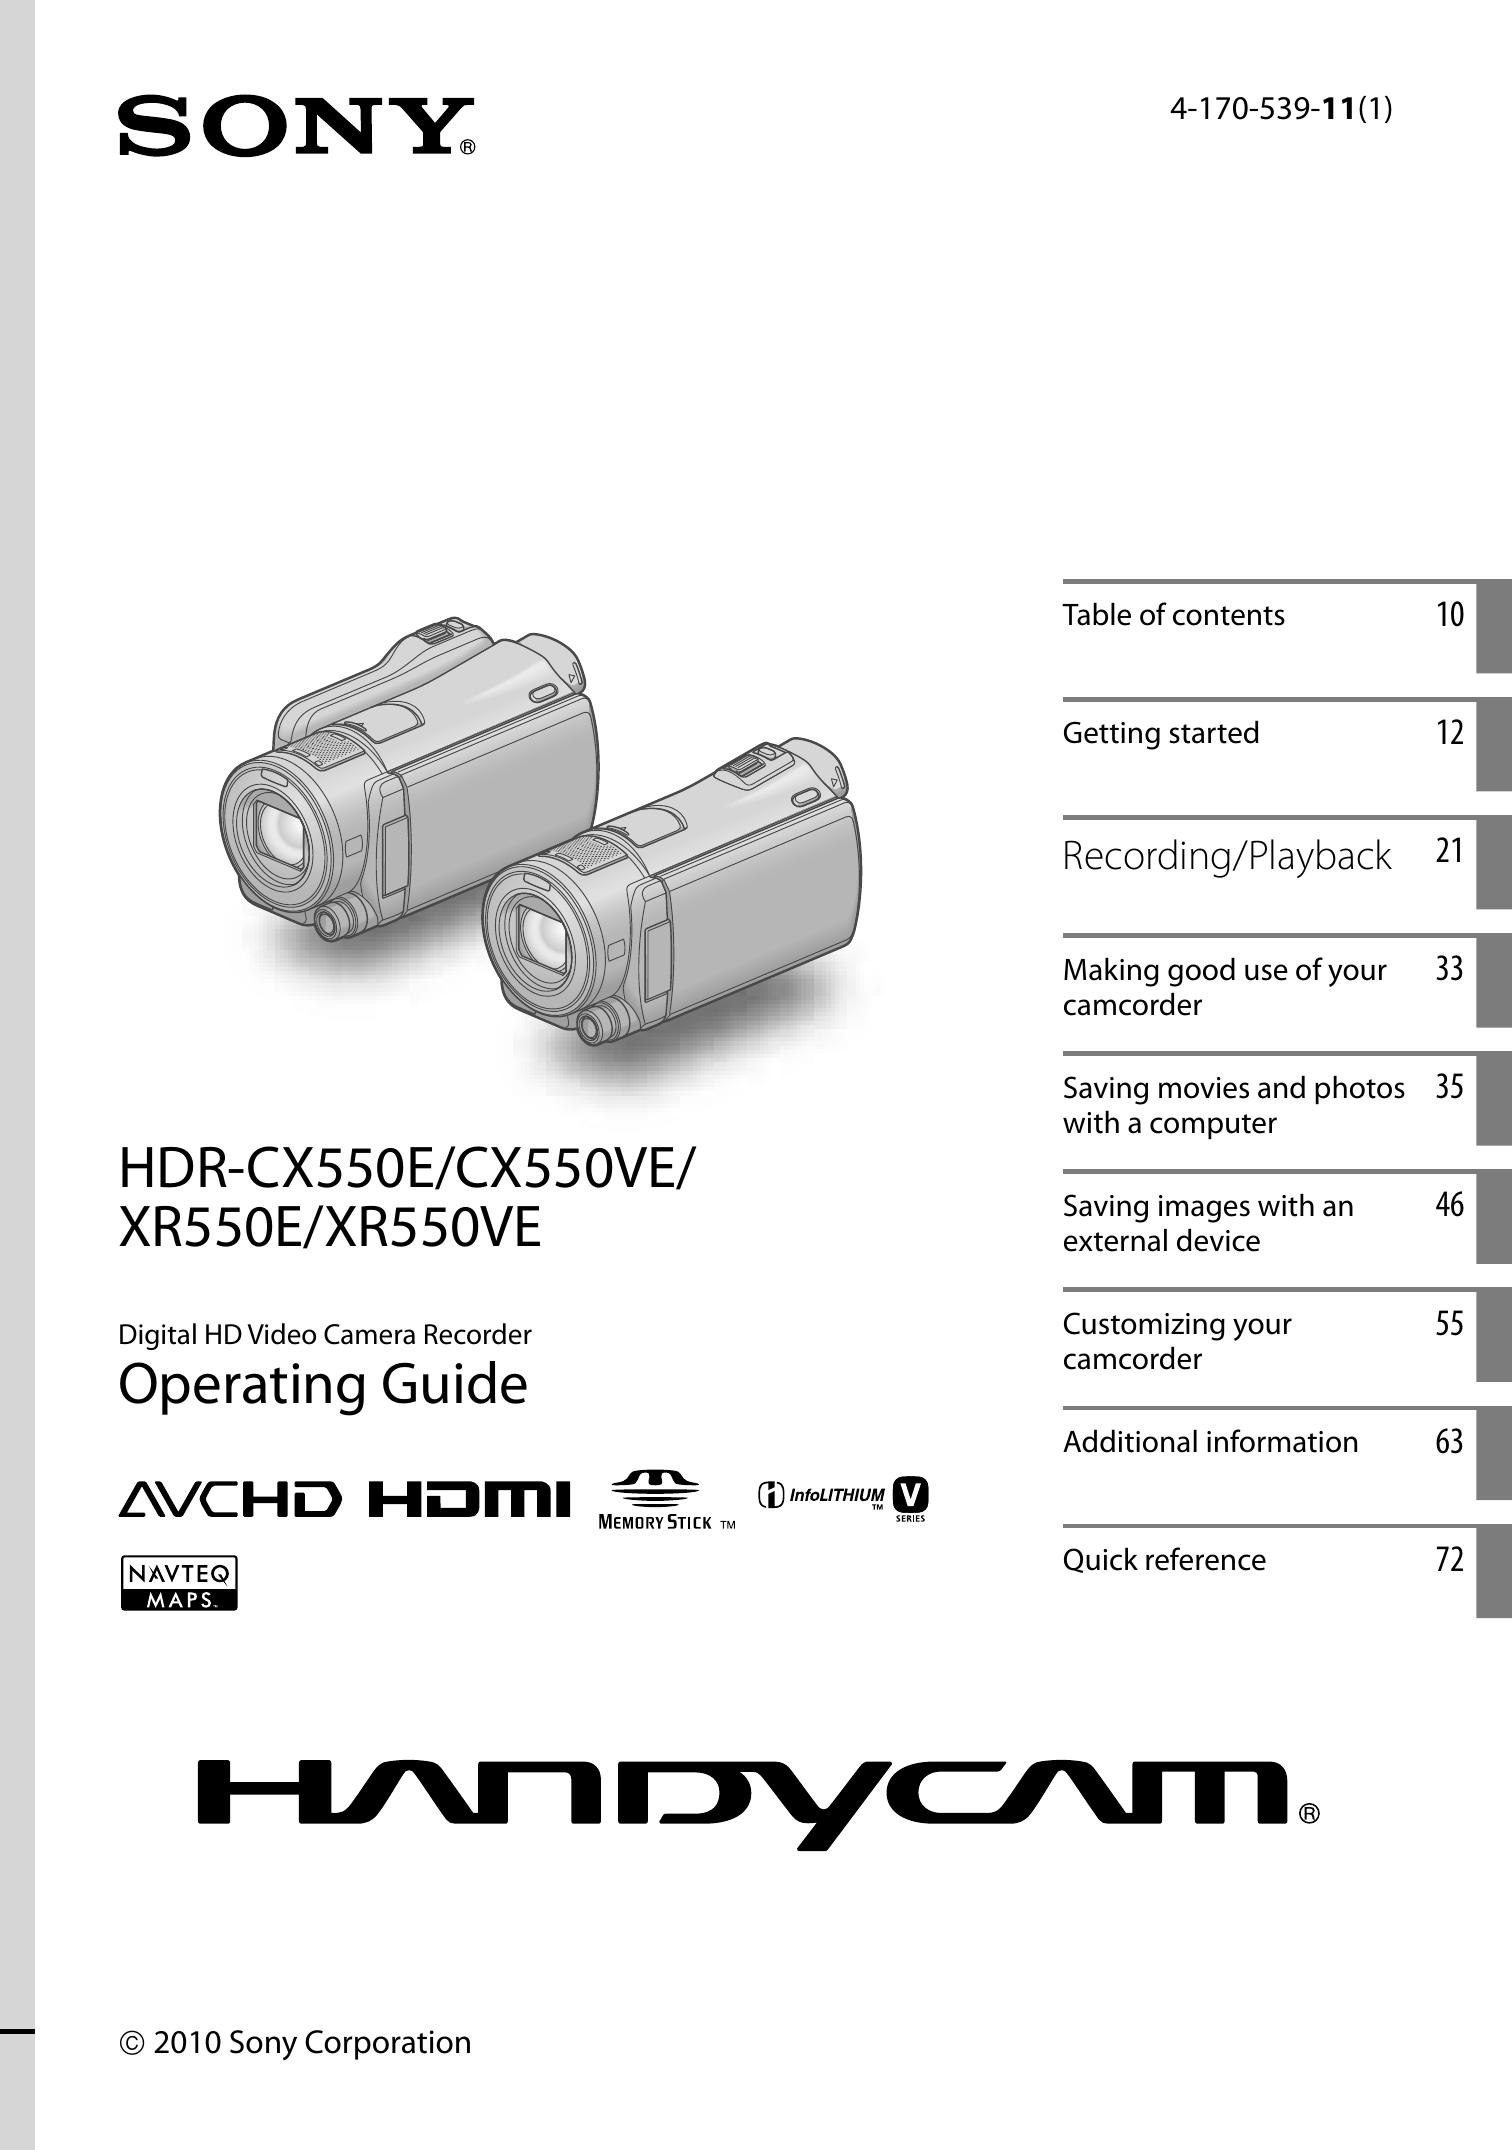 Sony 4-170-539-11(1) Camcorder User Manual